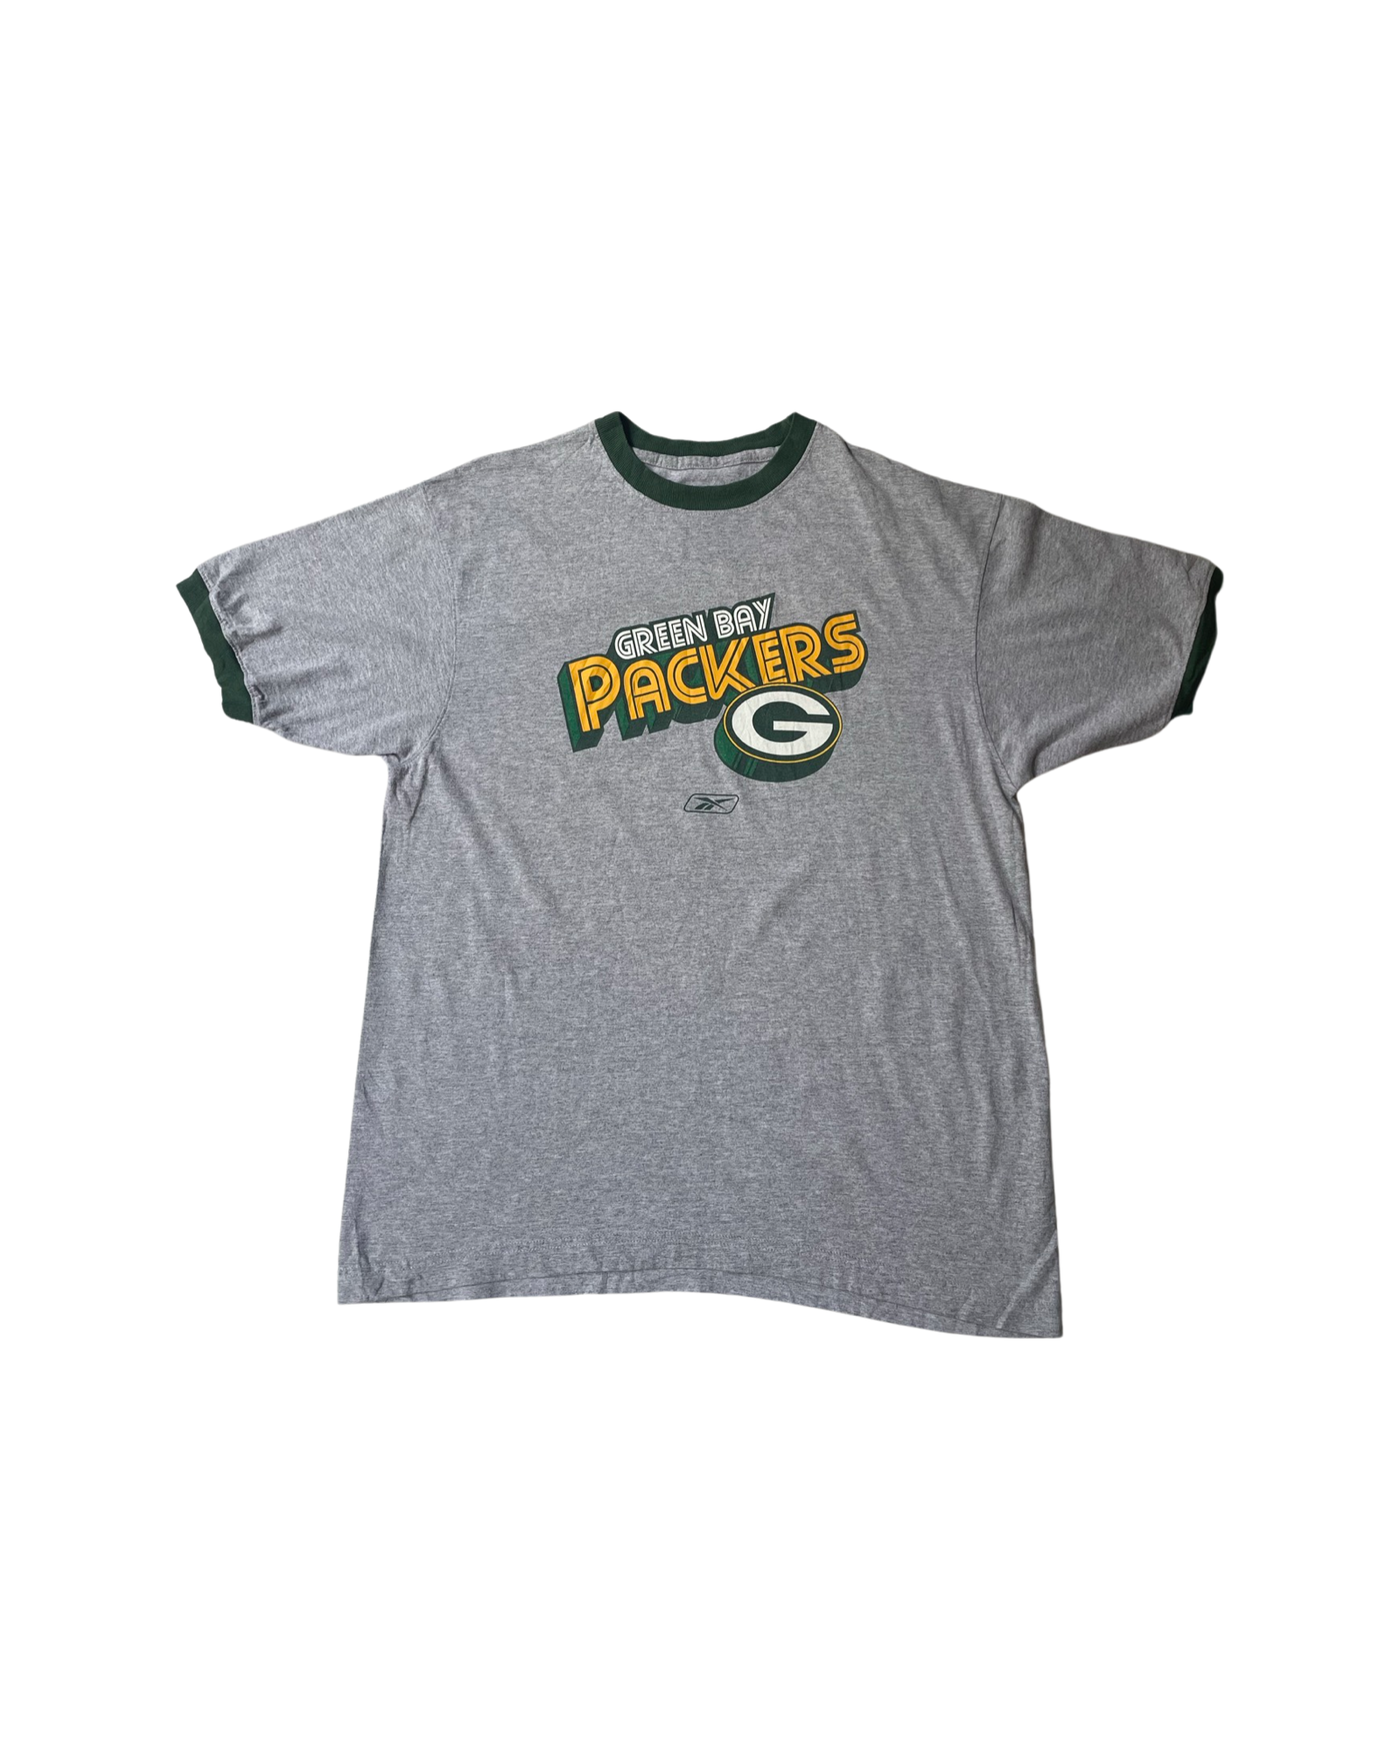 Vintage NFL Green Bay Packers T-Shirt